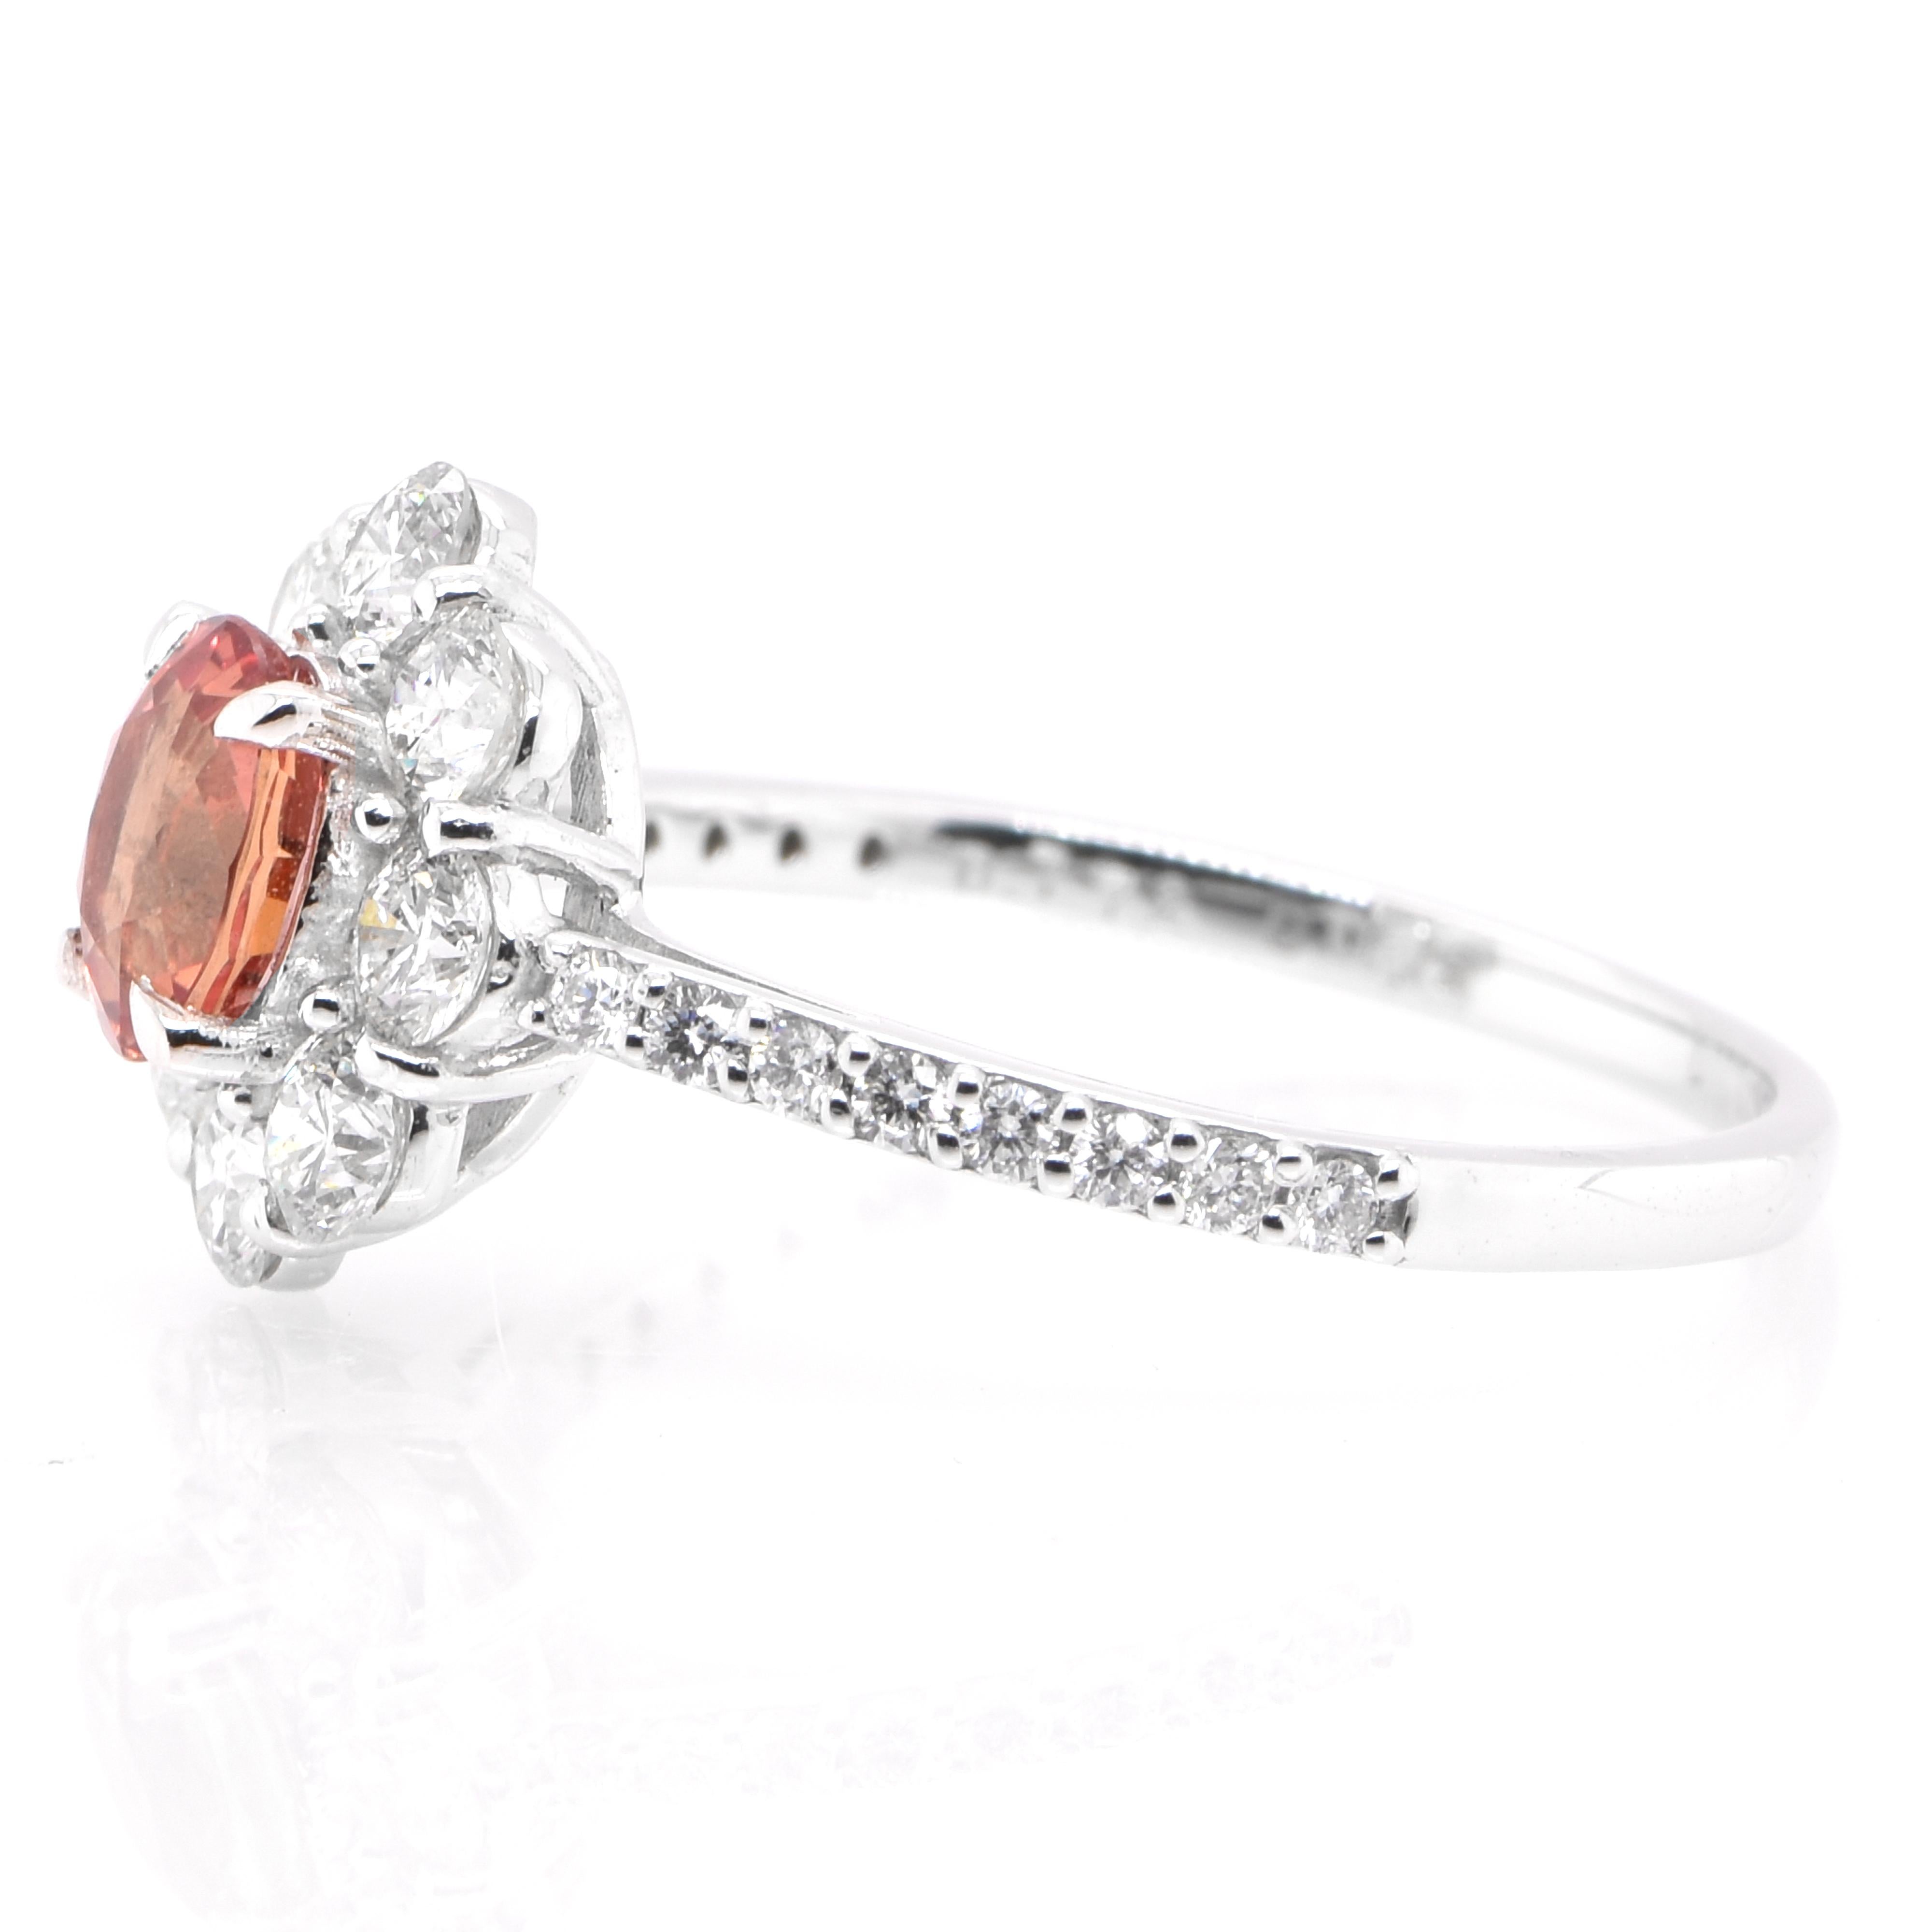 Oval Cut 0.77 Carat Natural Padparadscha Sapphire and Diamond Ring Set in Platinum